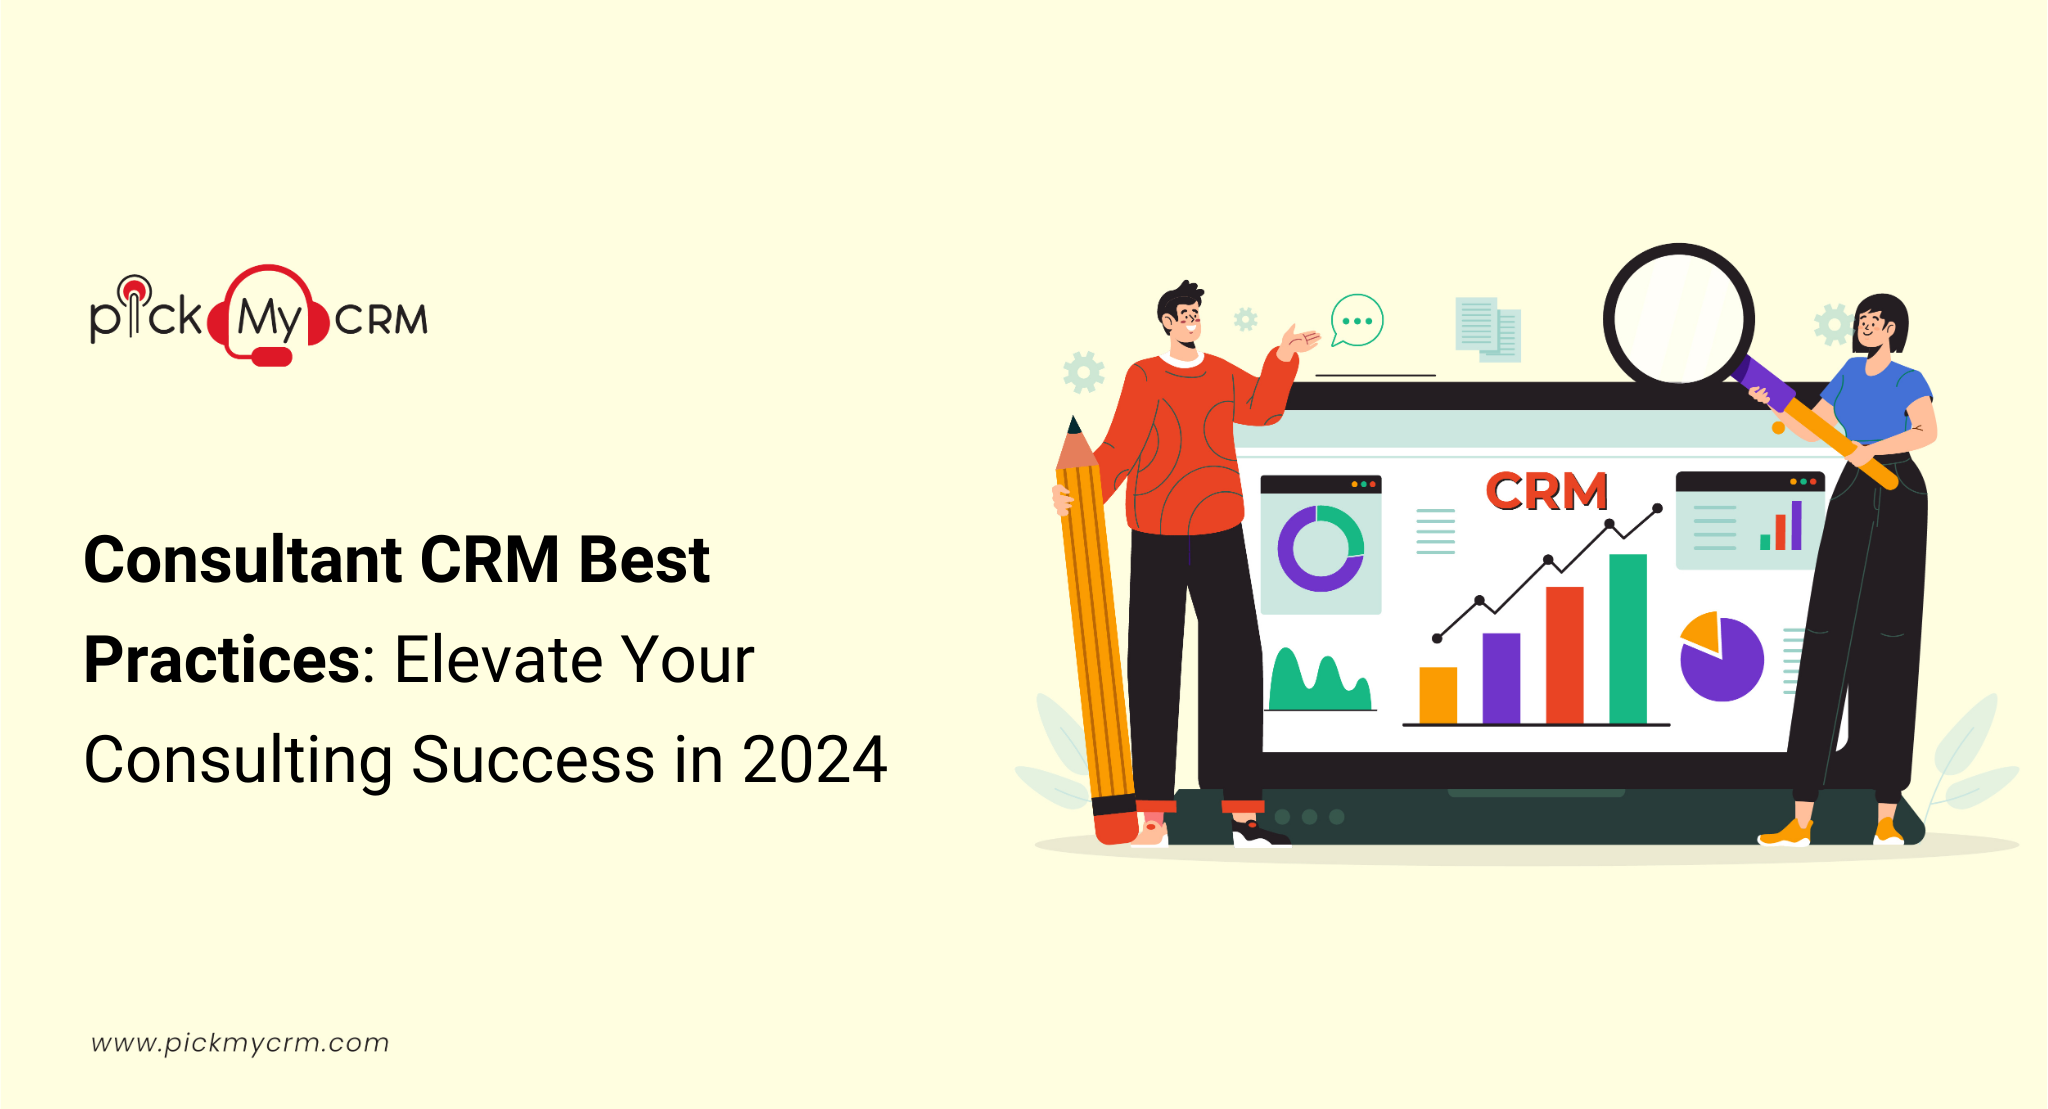 Consultant CRM Best Practices: Elevate Your Consulting Success in 2024